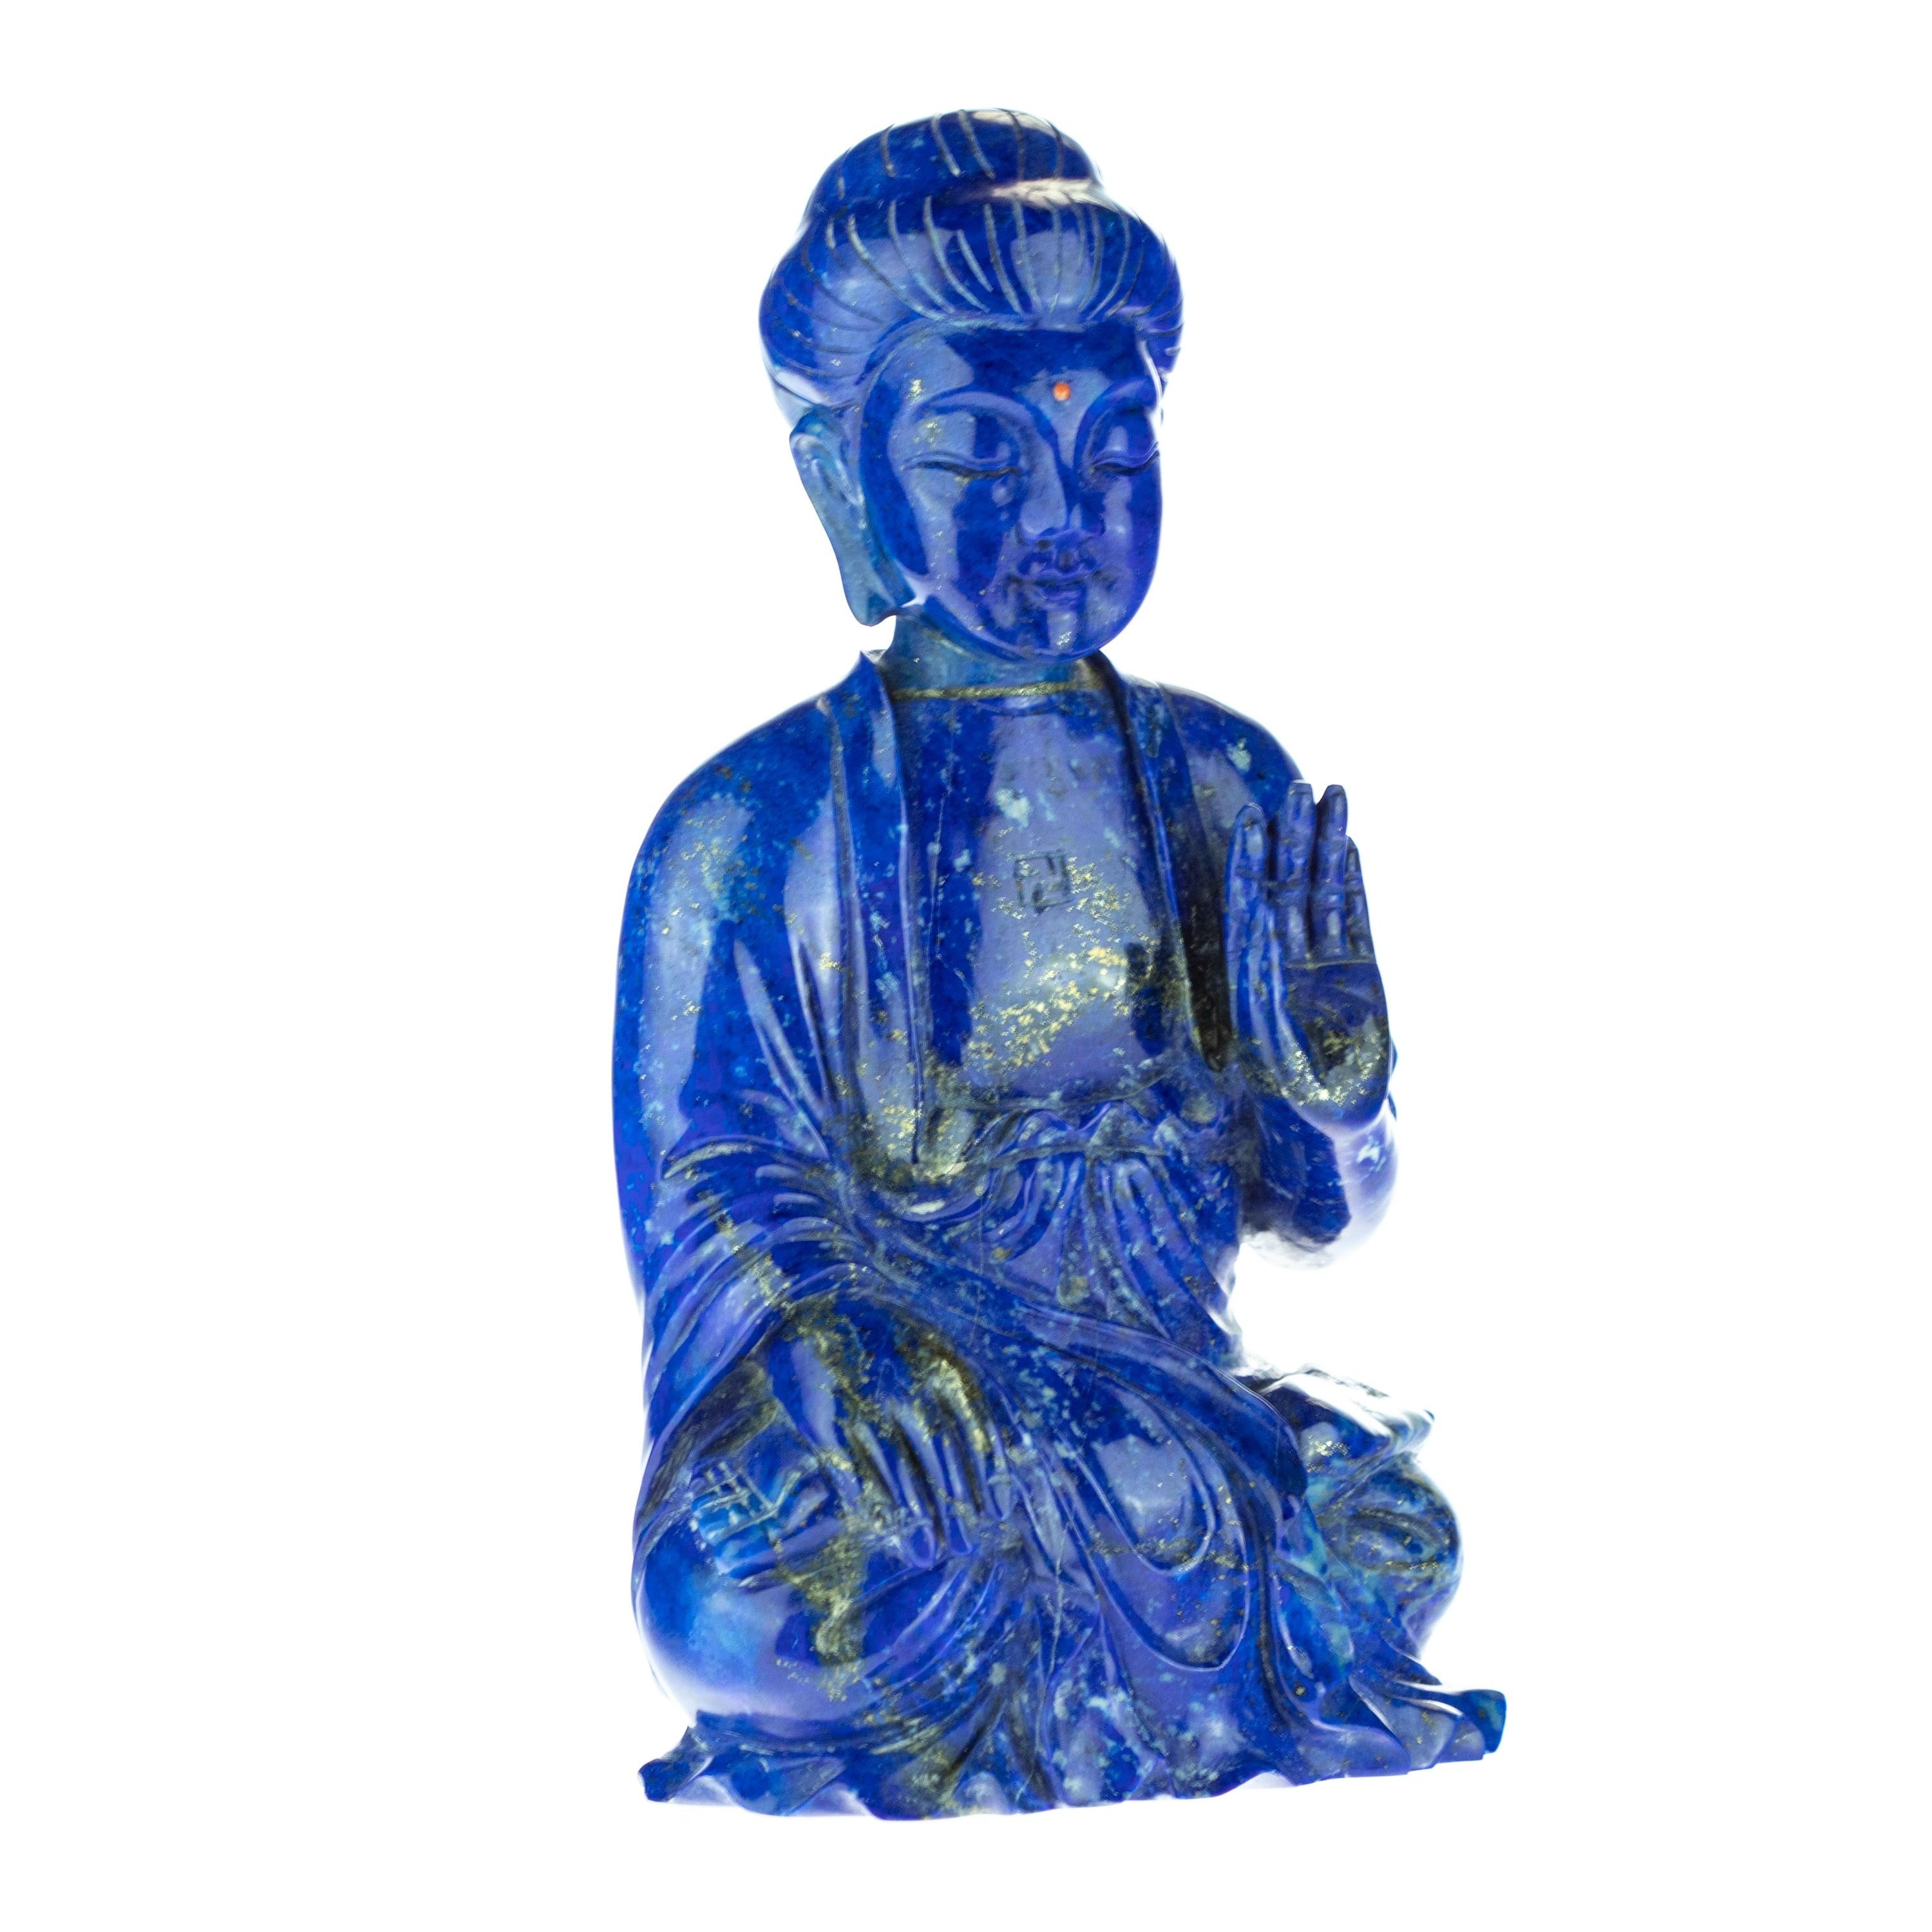 Hand-Carved Lapis Lazuli Guanyin Bodhisattva Female Buddha Asian Art Carved Statue Sculpture For Sale